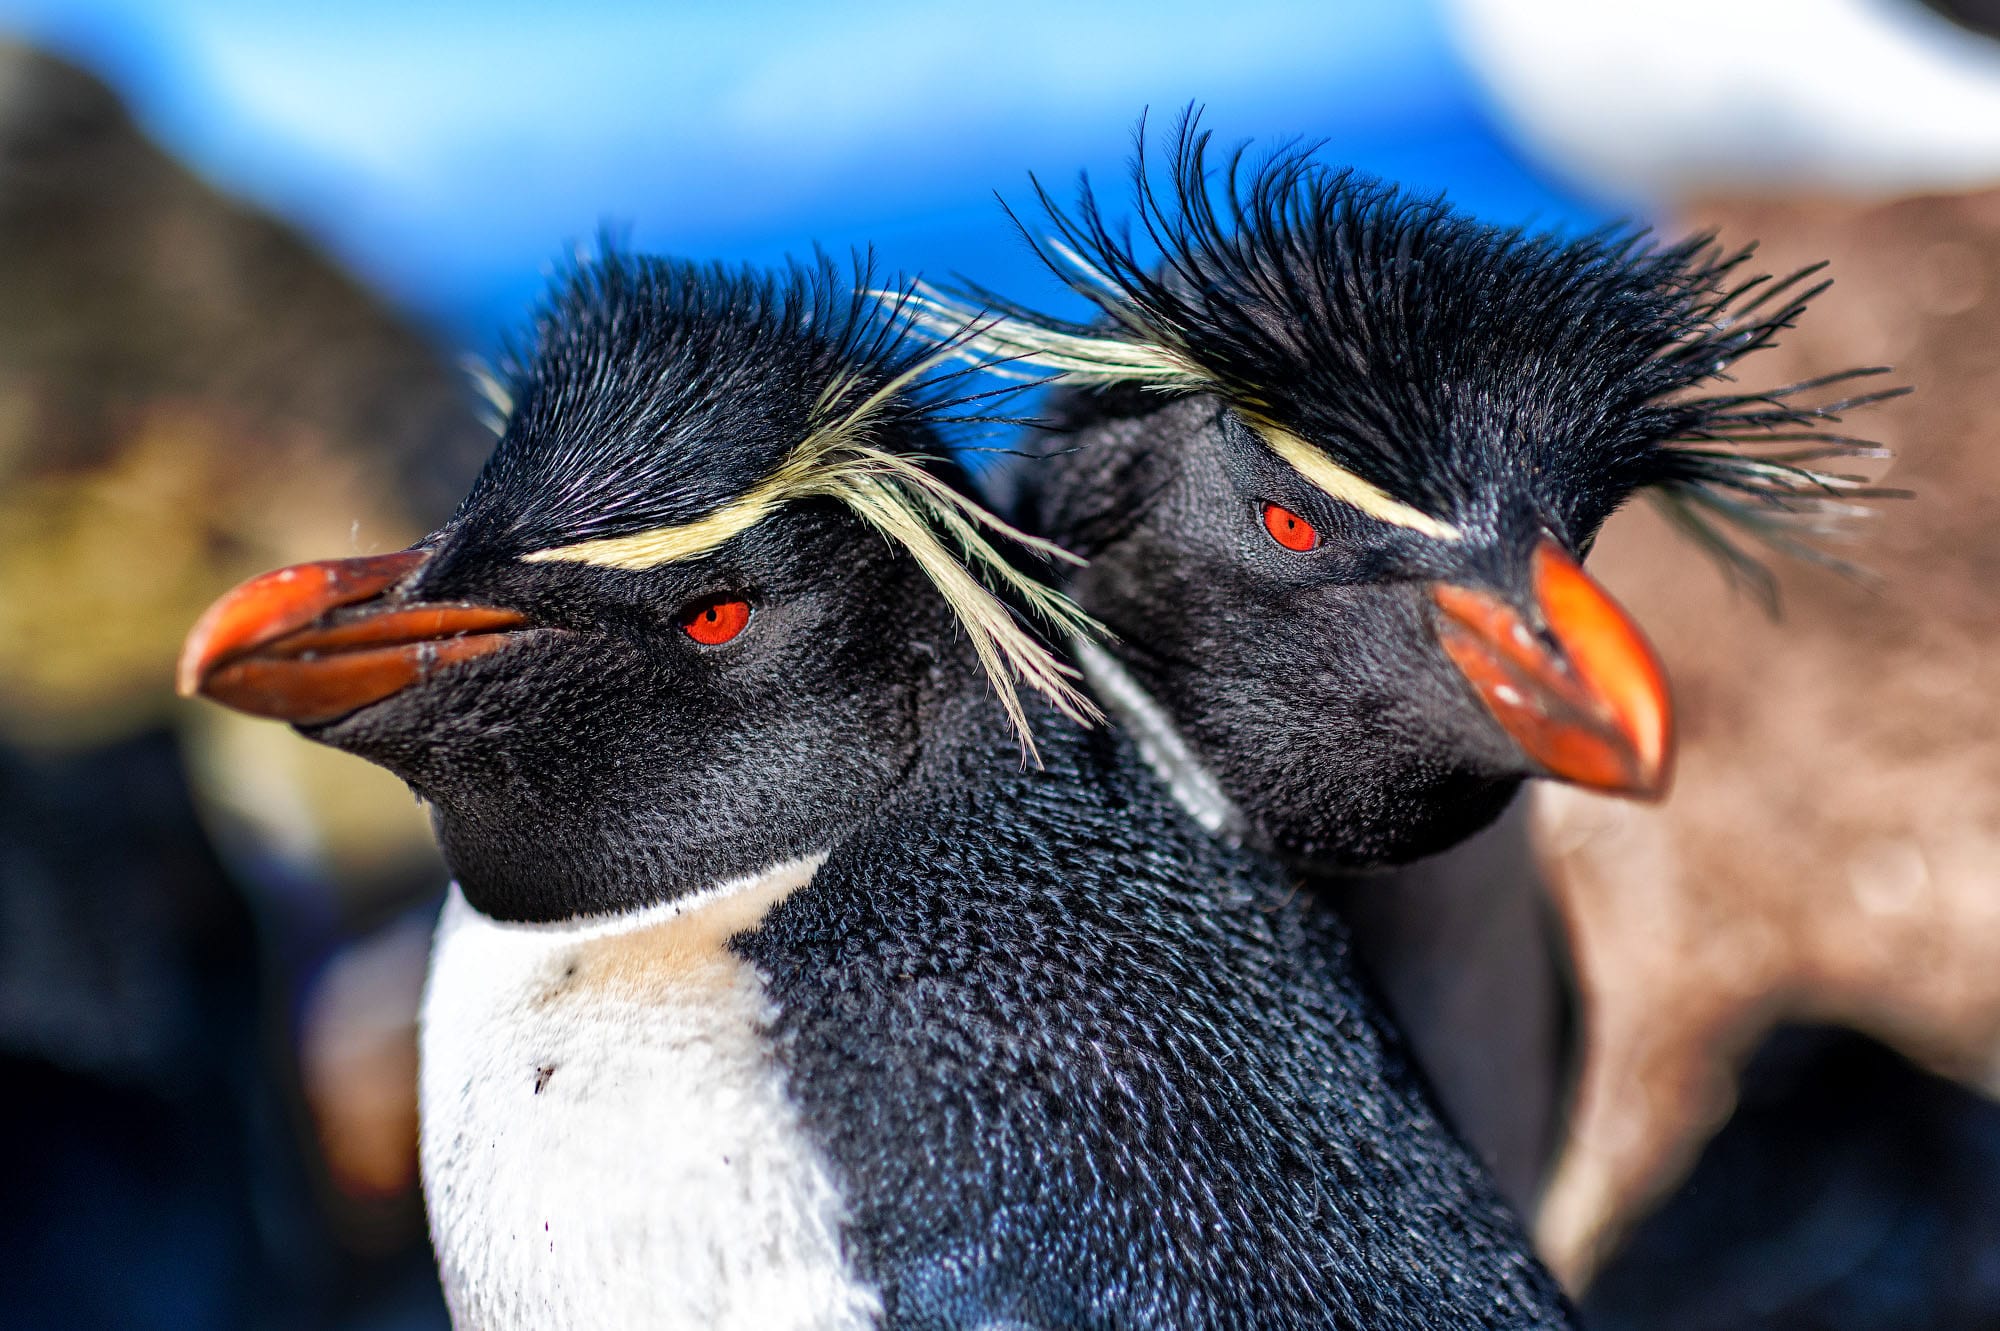 Watching birds and penguins in Antarctic expedition cruises